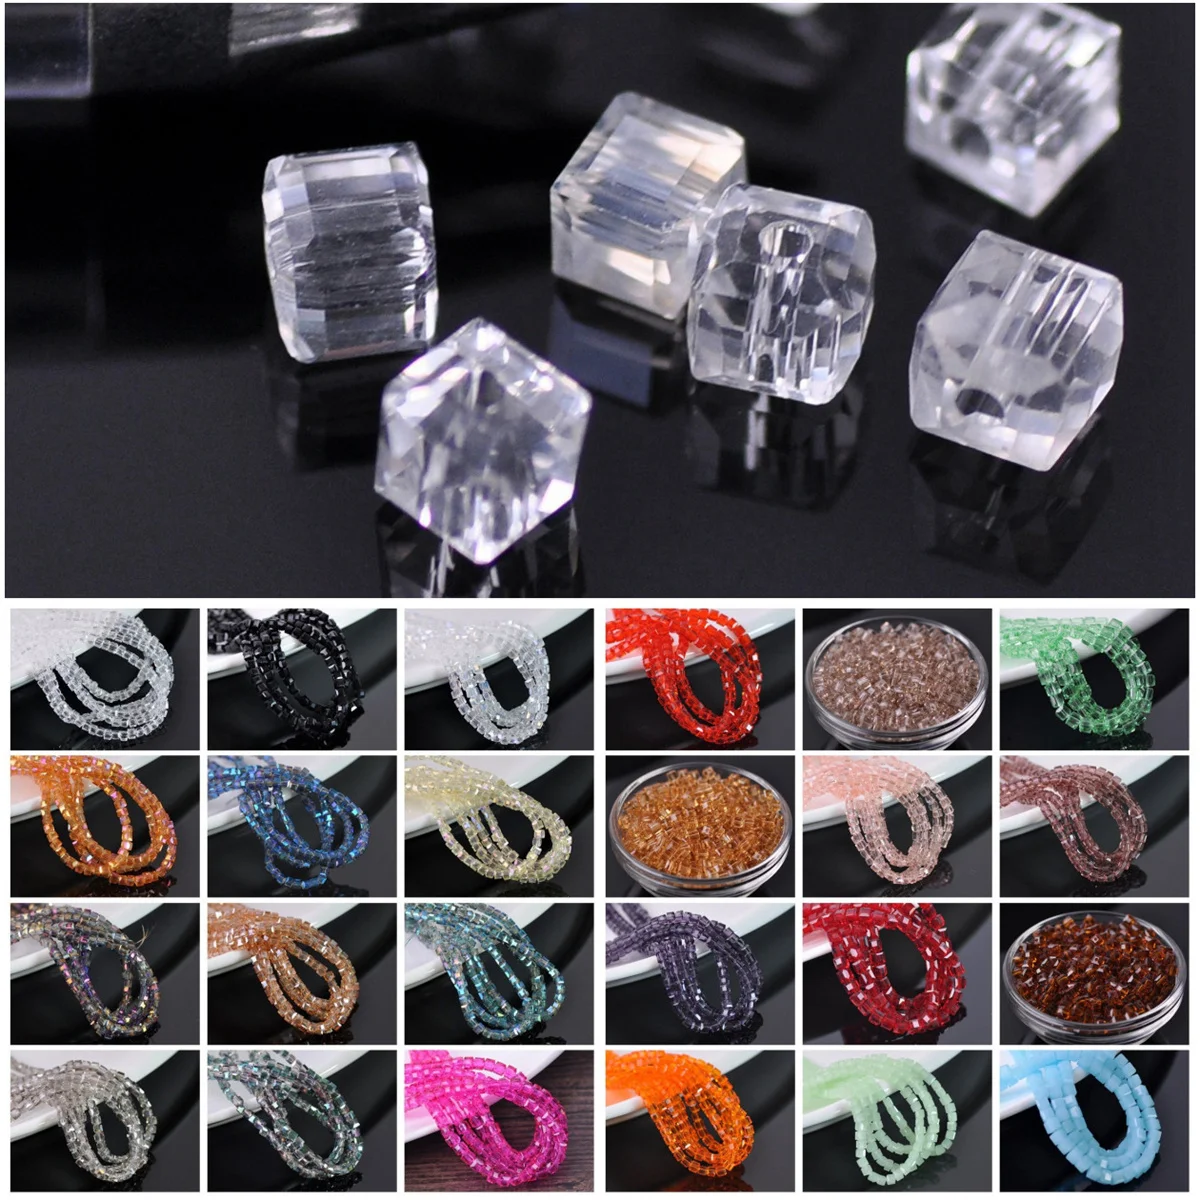 30pcs/50pcs/100pcs Cube Square Faceted Czech Crystal Glass 3mm 4mm 6mm 8mm Loose Crafts Beads Lot For Jewelry Making DIY